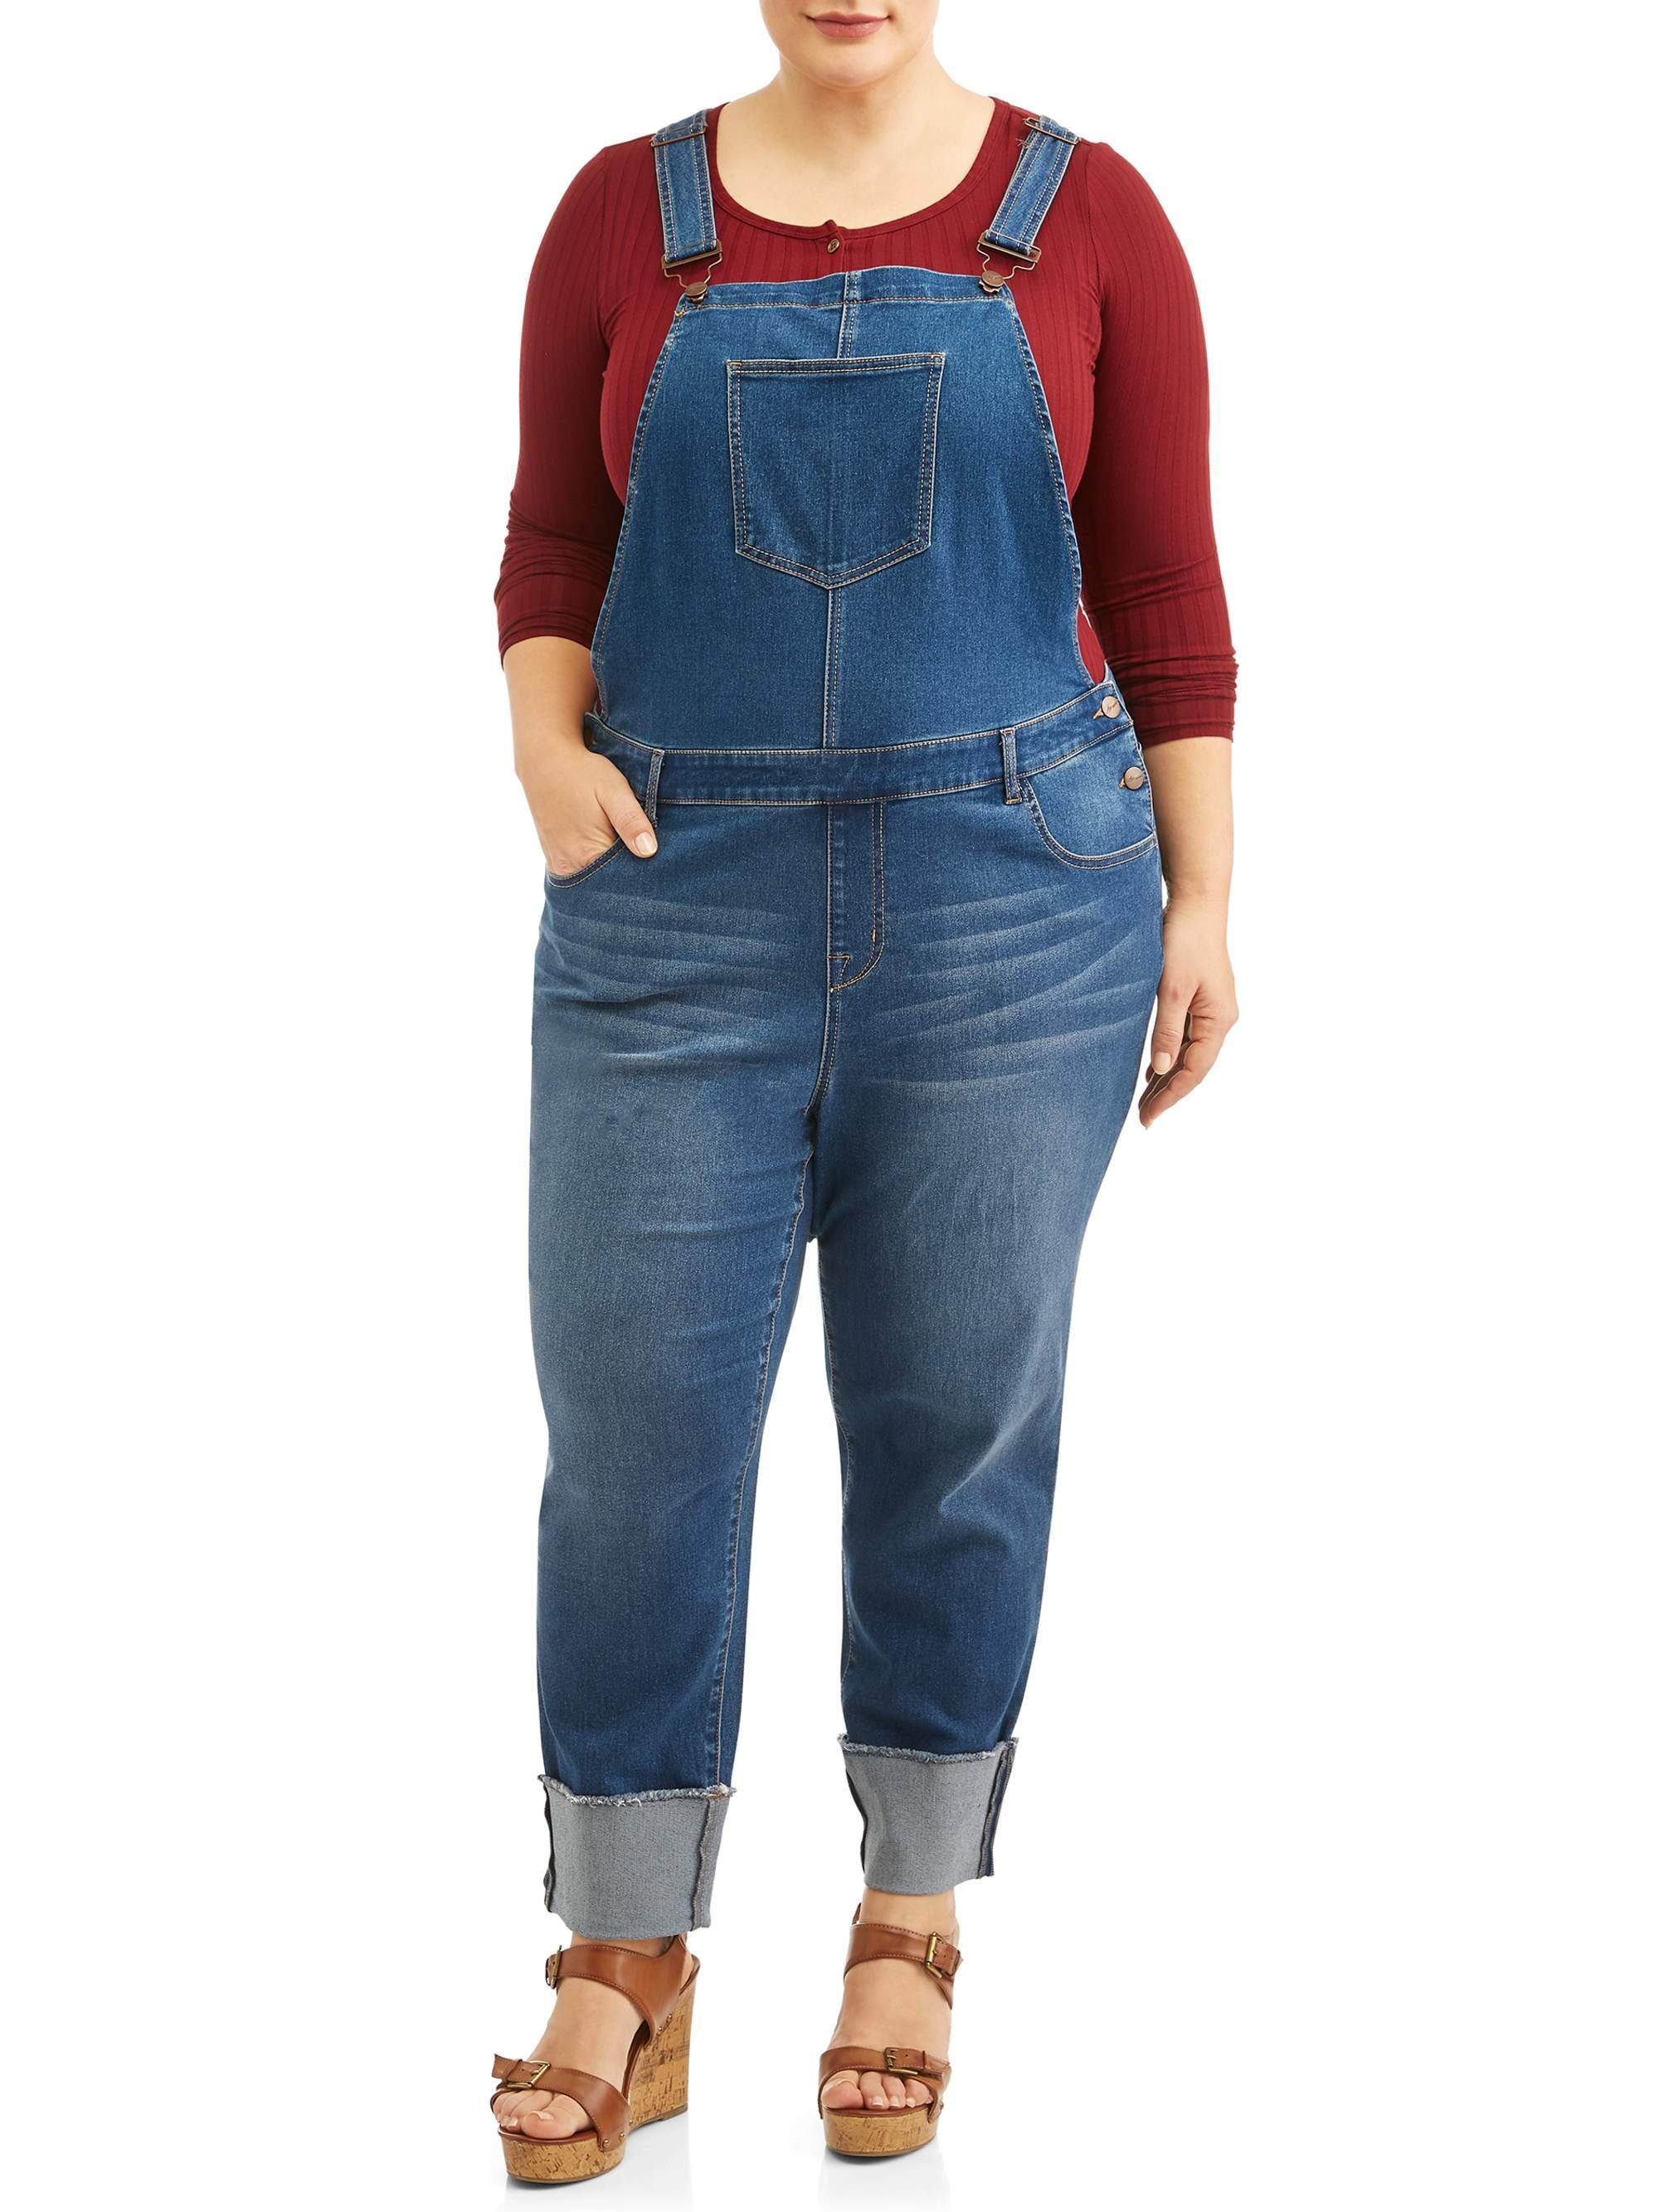 TwiinSisters Women's Plus Size Natural Curve Enhancing Slim Fitted Overalls with Comfort Stretch 